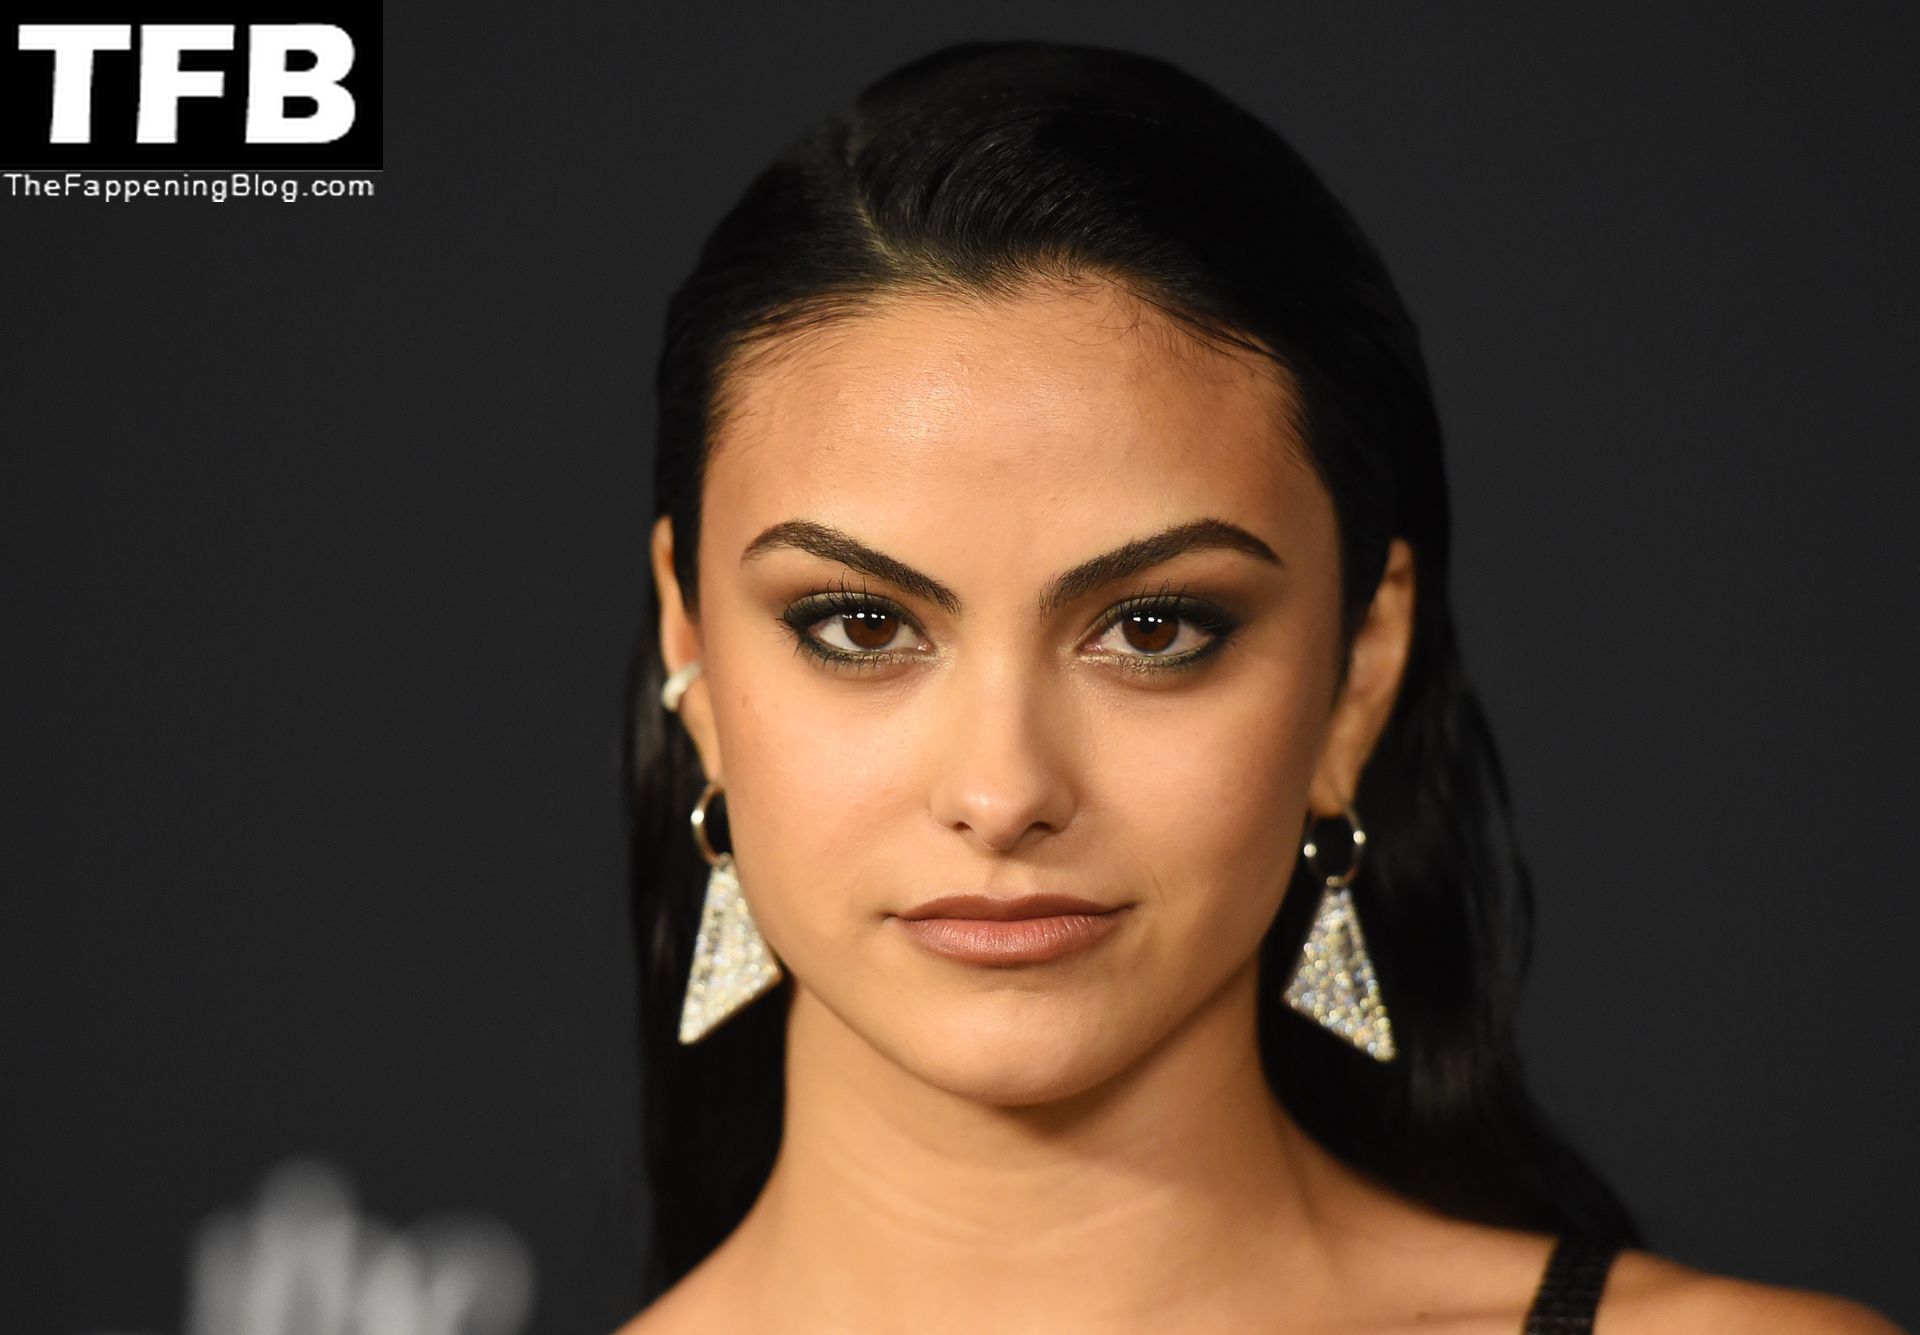 Camila-Mendes-See-Through-Tits-The-Fappening-Blog-67.jpg